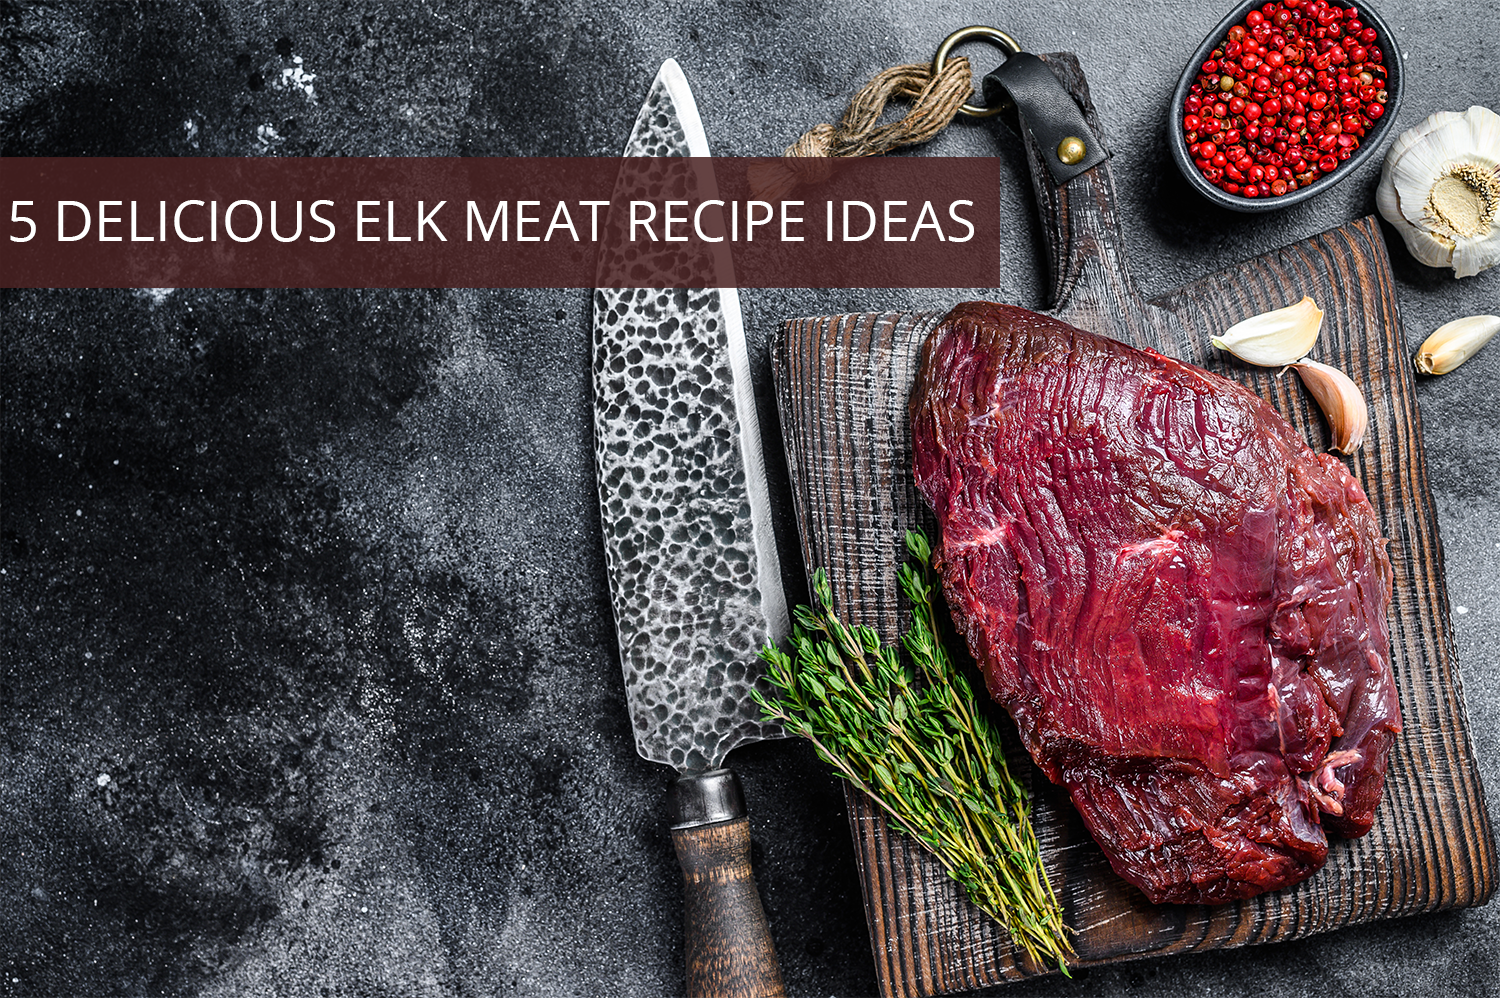 Elk meat on a wooden board with red pepper corns, a garlic bulb, fresh greens herbs, and a knife next to it.